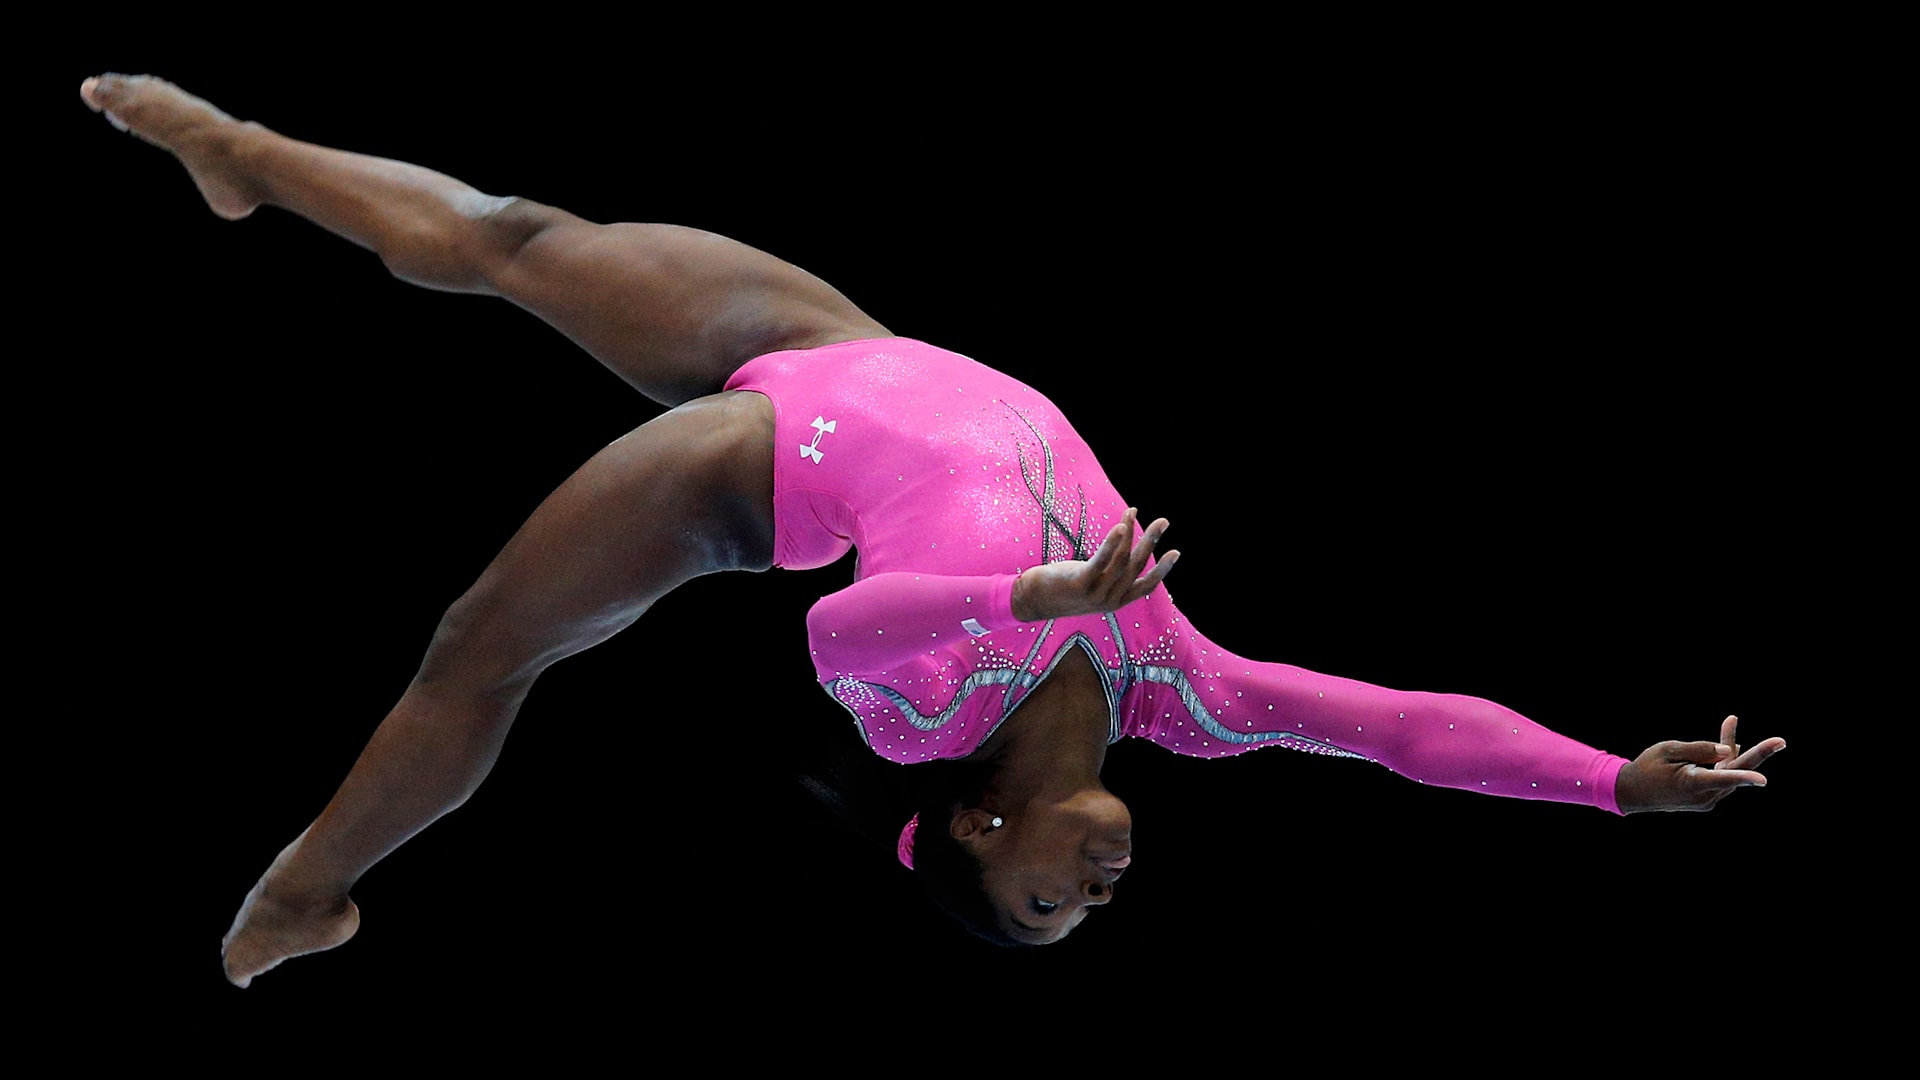 Simone Biles 1st Trailer For Documentary: Watch Her Train For